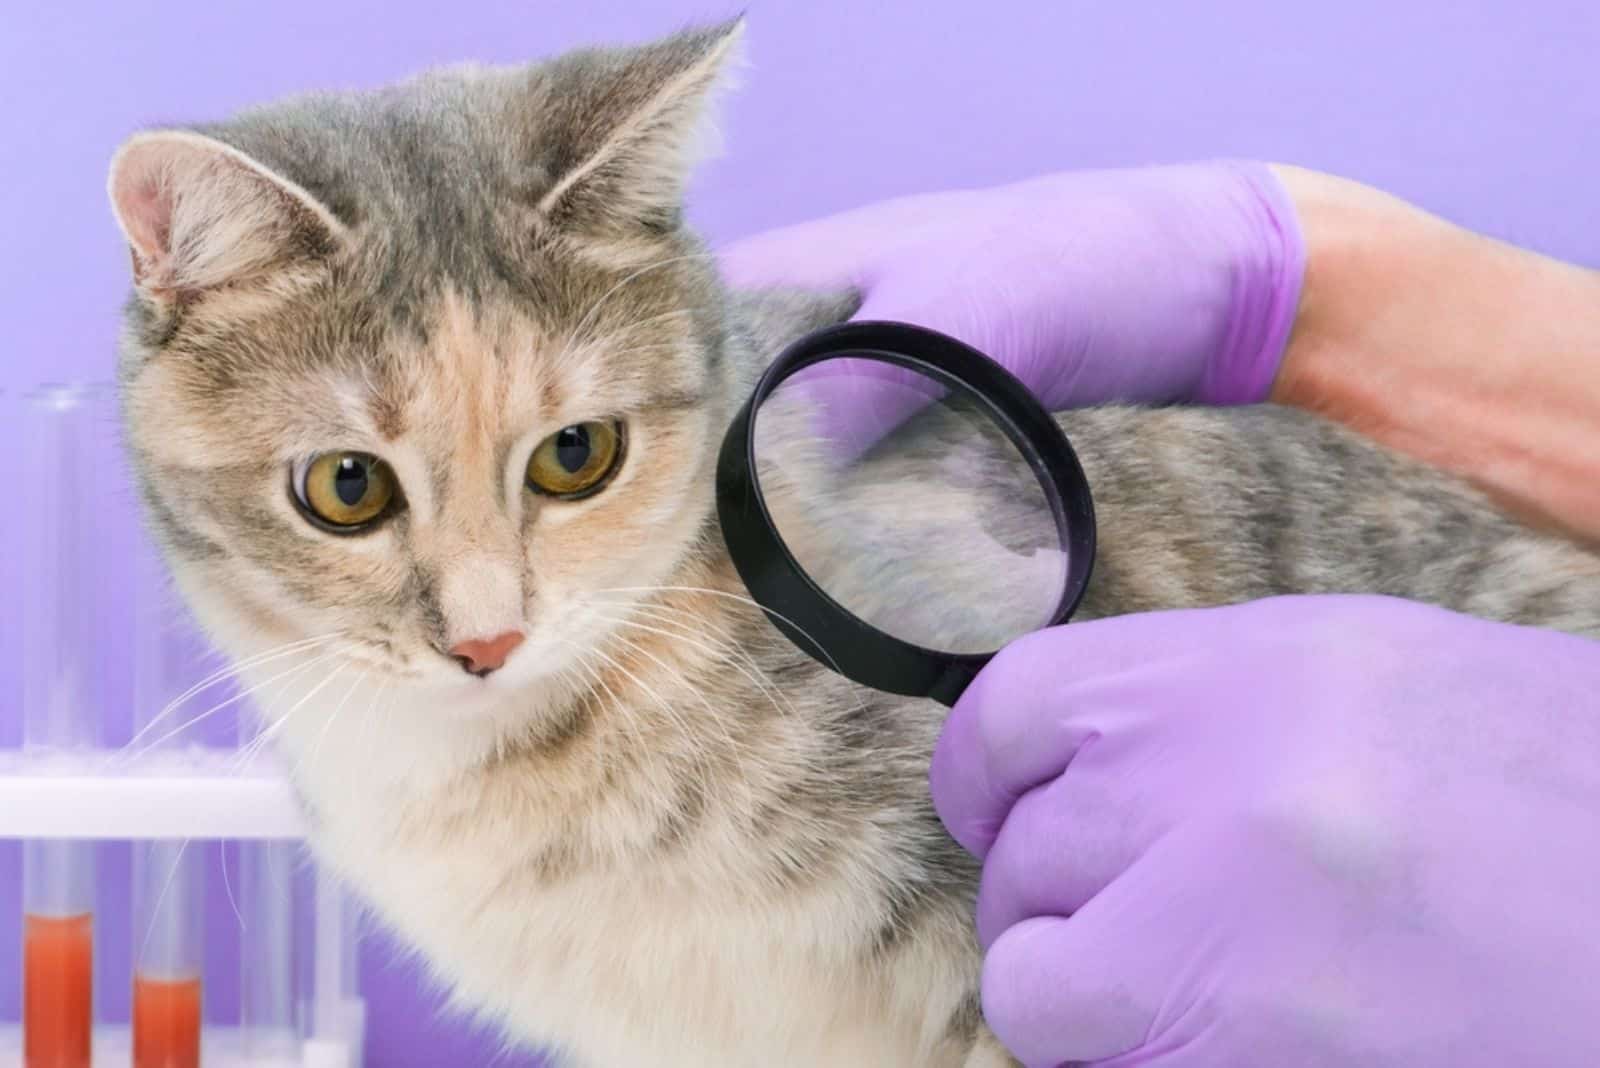 veterinarian looks at the skin of a cat with a magnifying glass